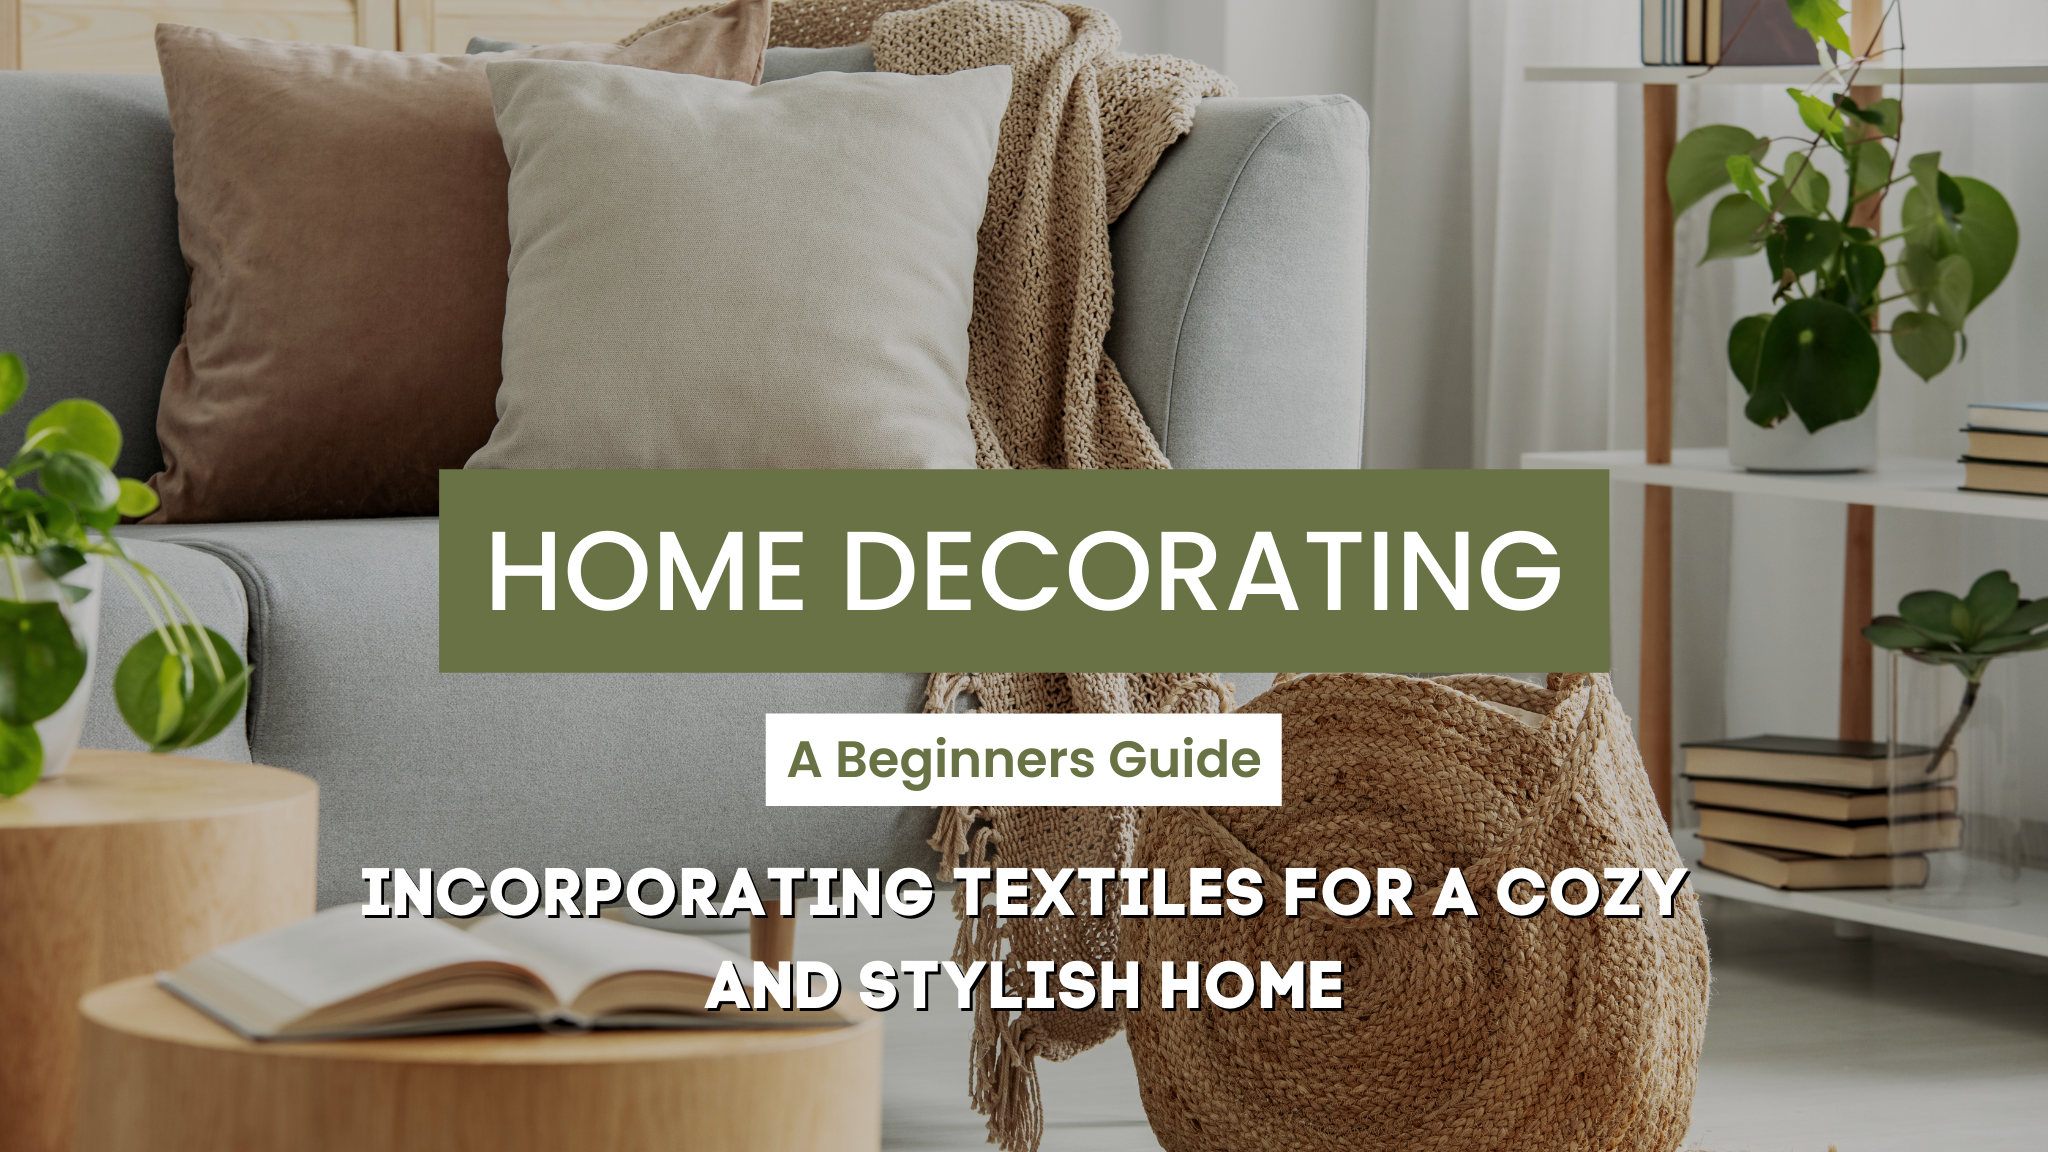 Incorporating Textiles in Home Decor